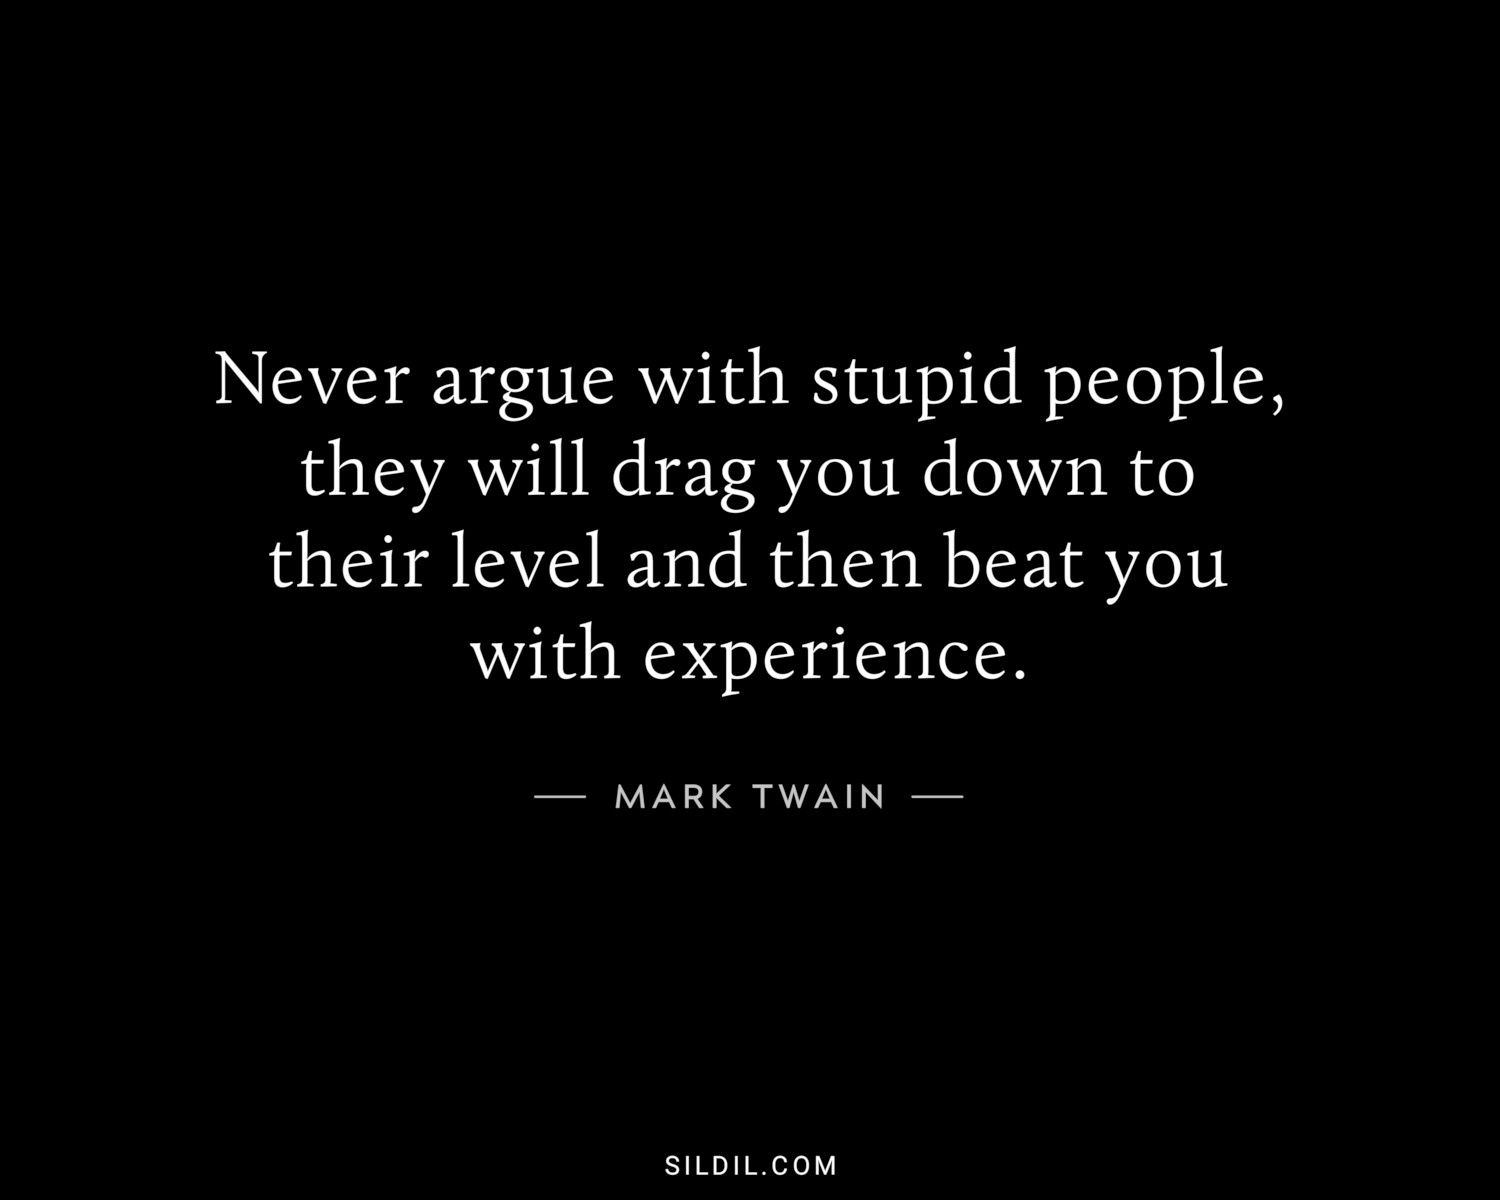 Never argue with stupid people, they will drag you down to their level and then beat you with experience.